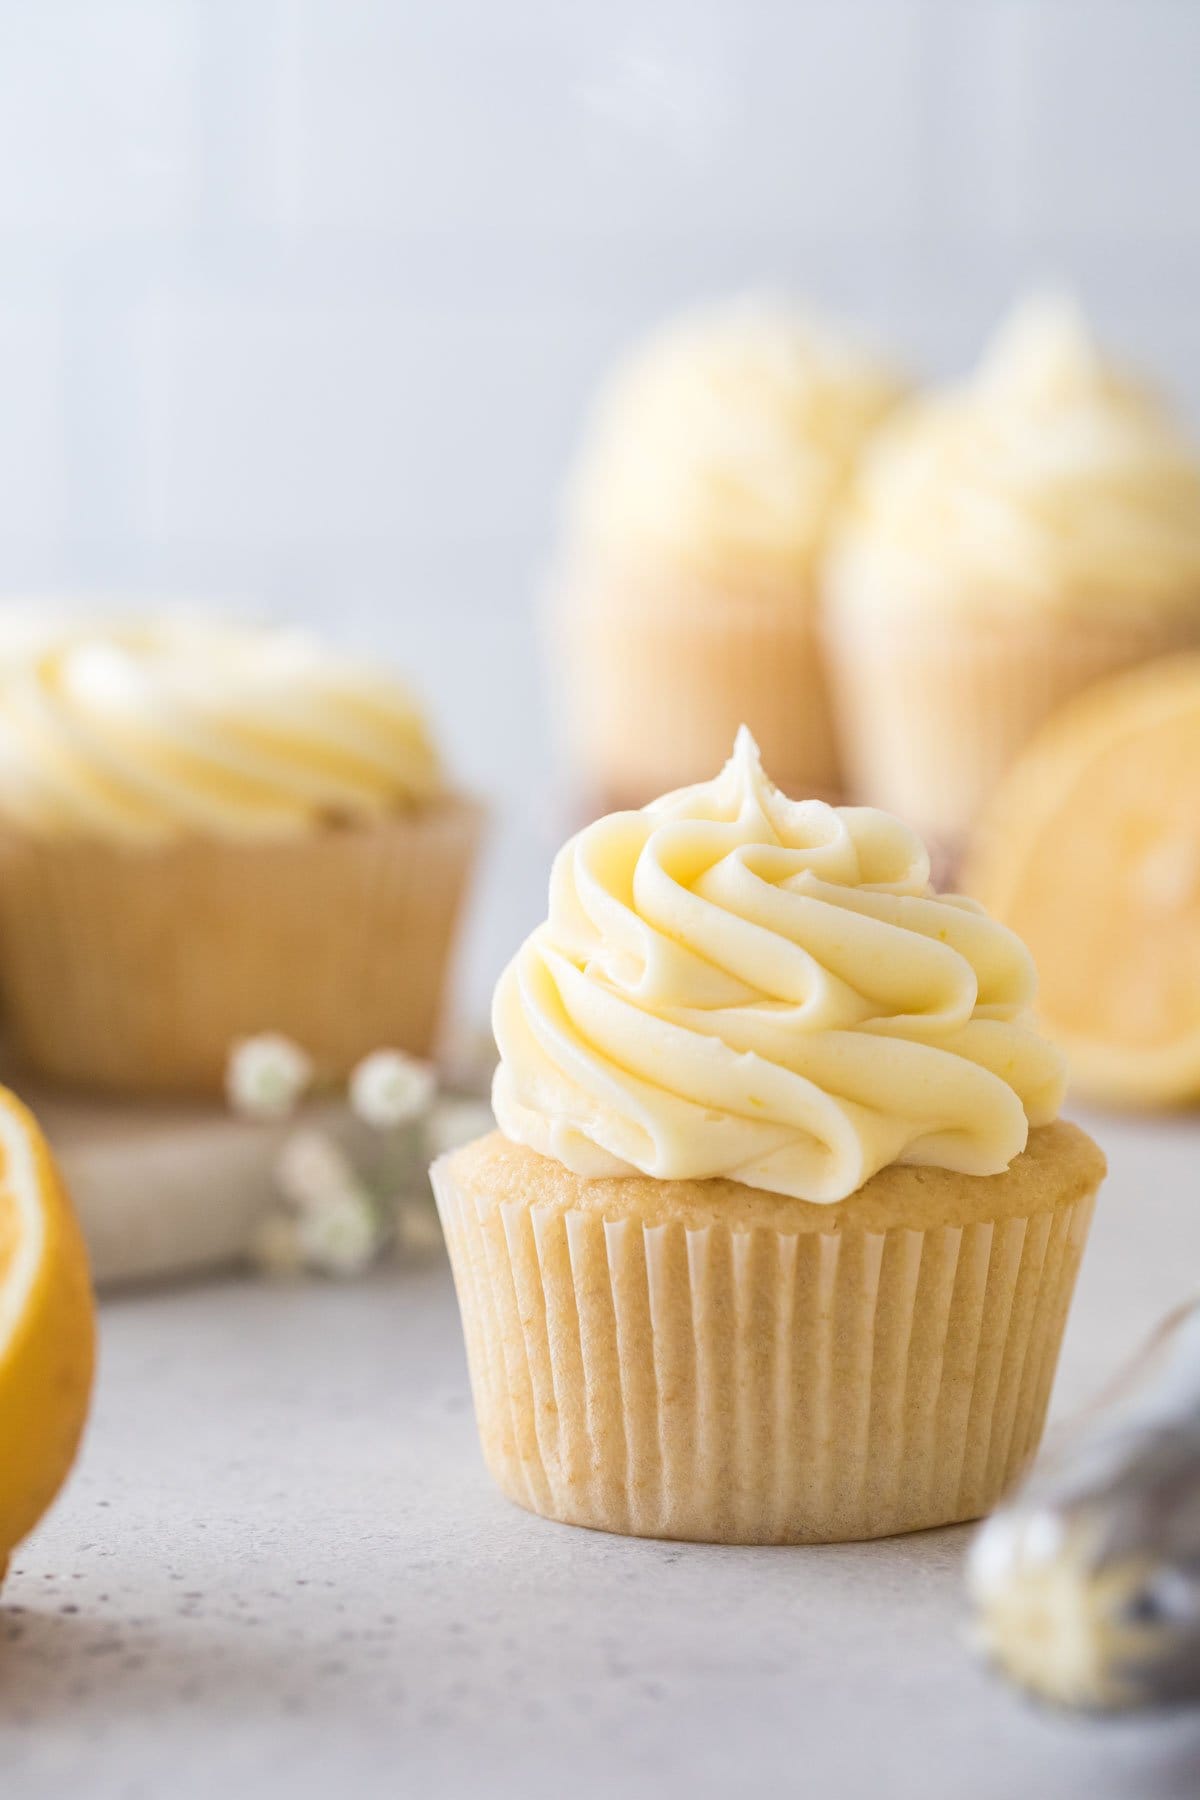 vanilla cupcake piped with a thick dollop of pale yellow frosting